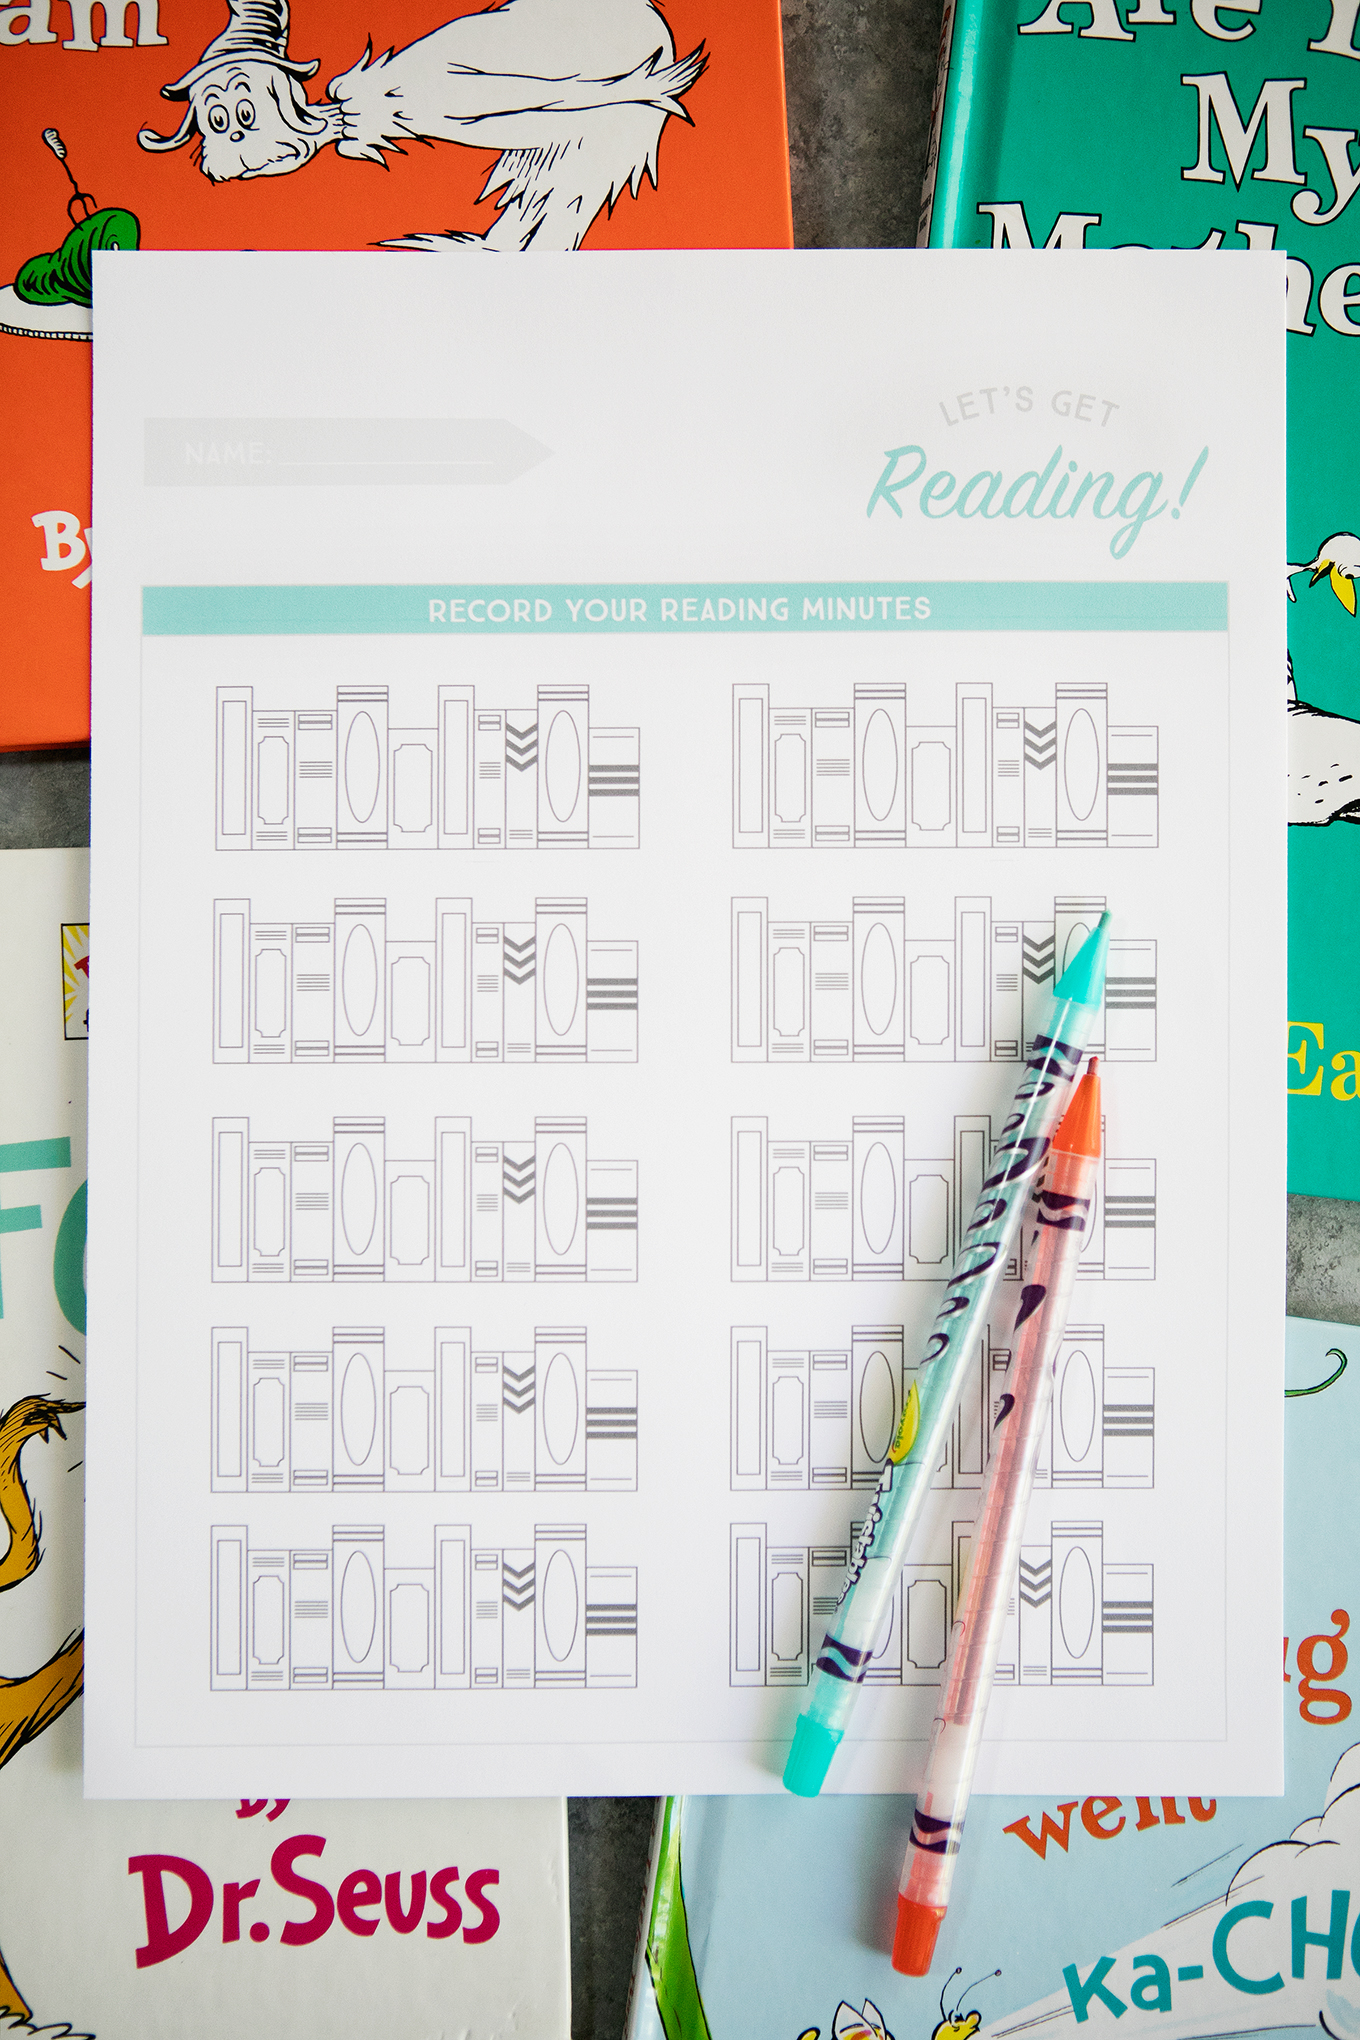 Mom's Summer Reading Challenge is a fun way to get your kids excited about reading all the books this summer! Use our printable reading log and the ideas in this post to encourage your kids to meet their reading goals.